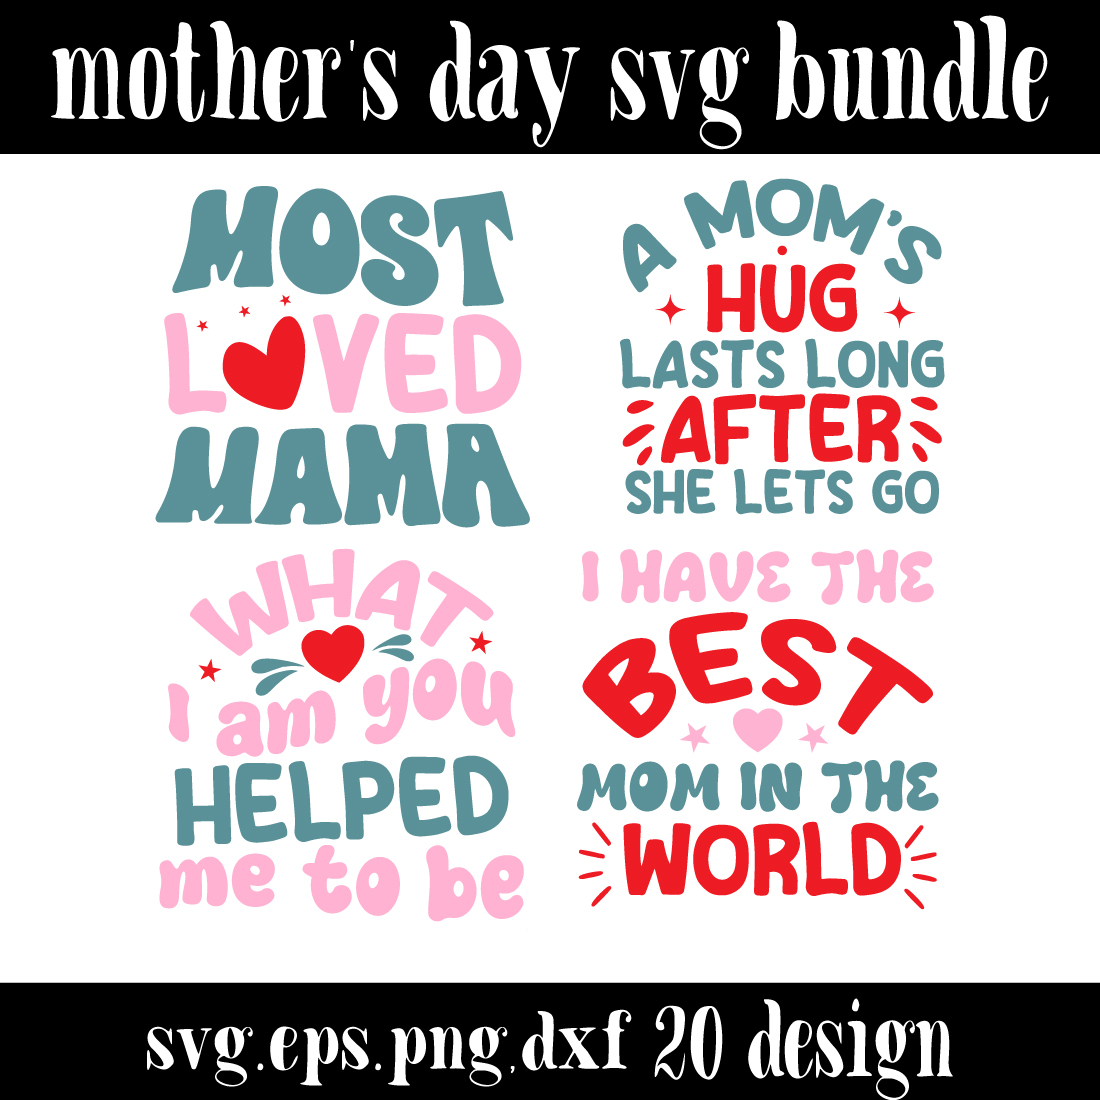 mother's day svg bundle cover image.